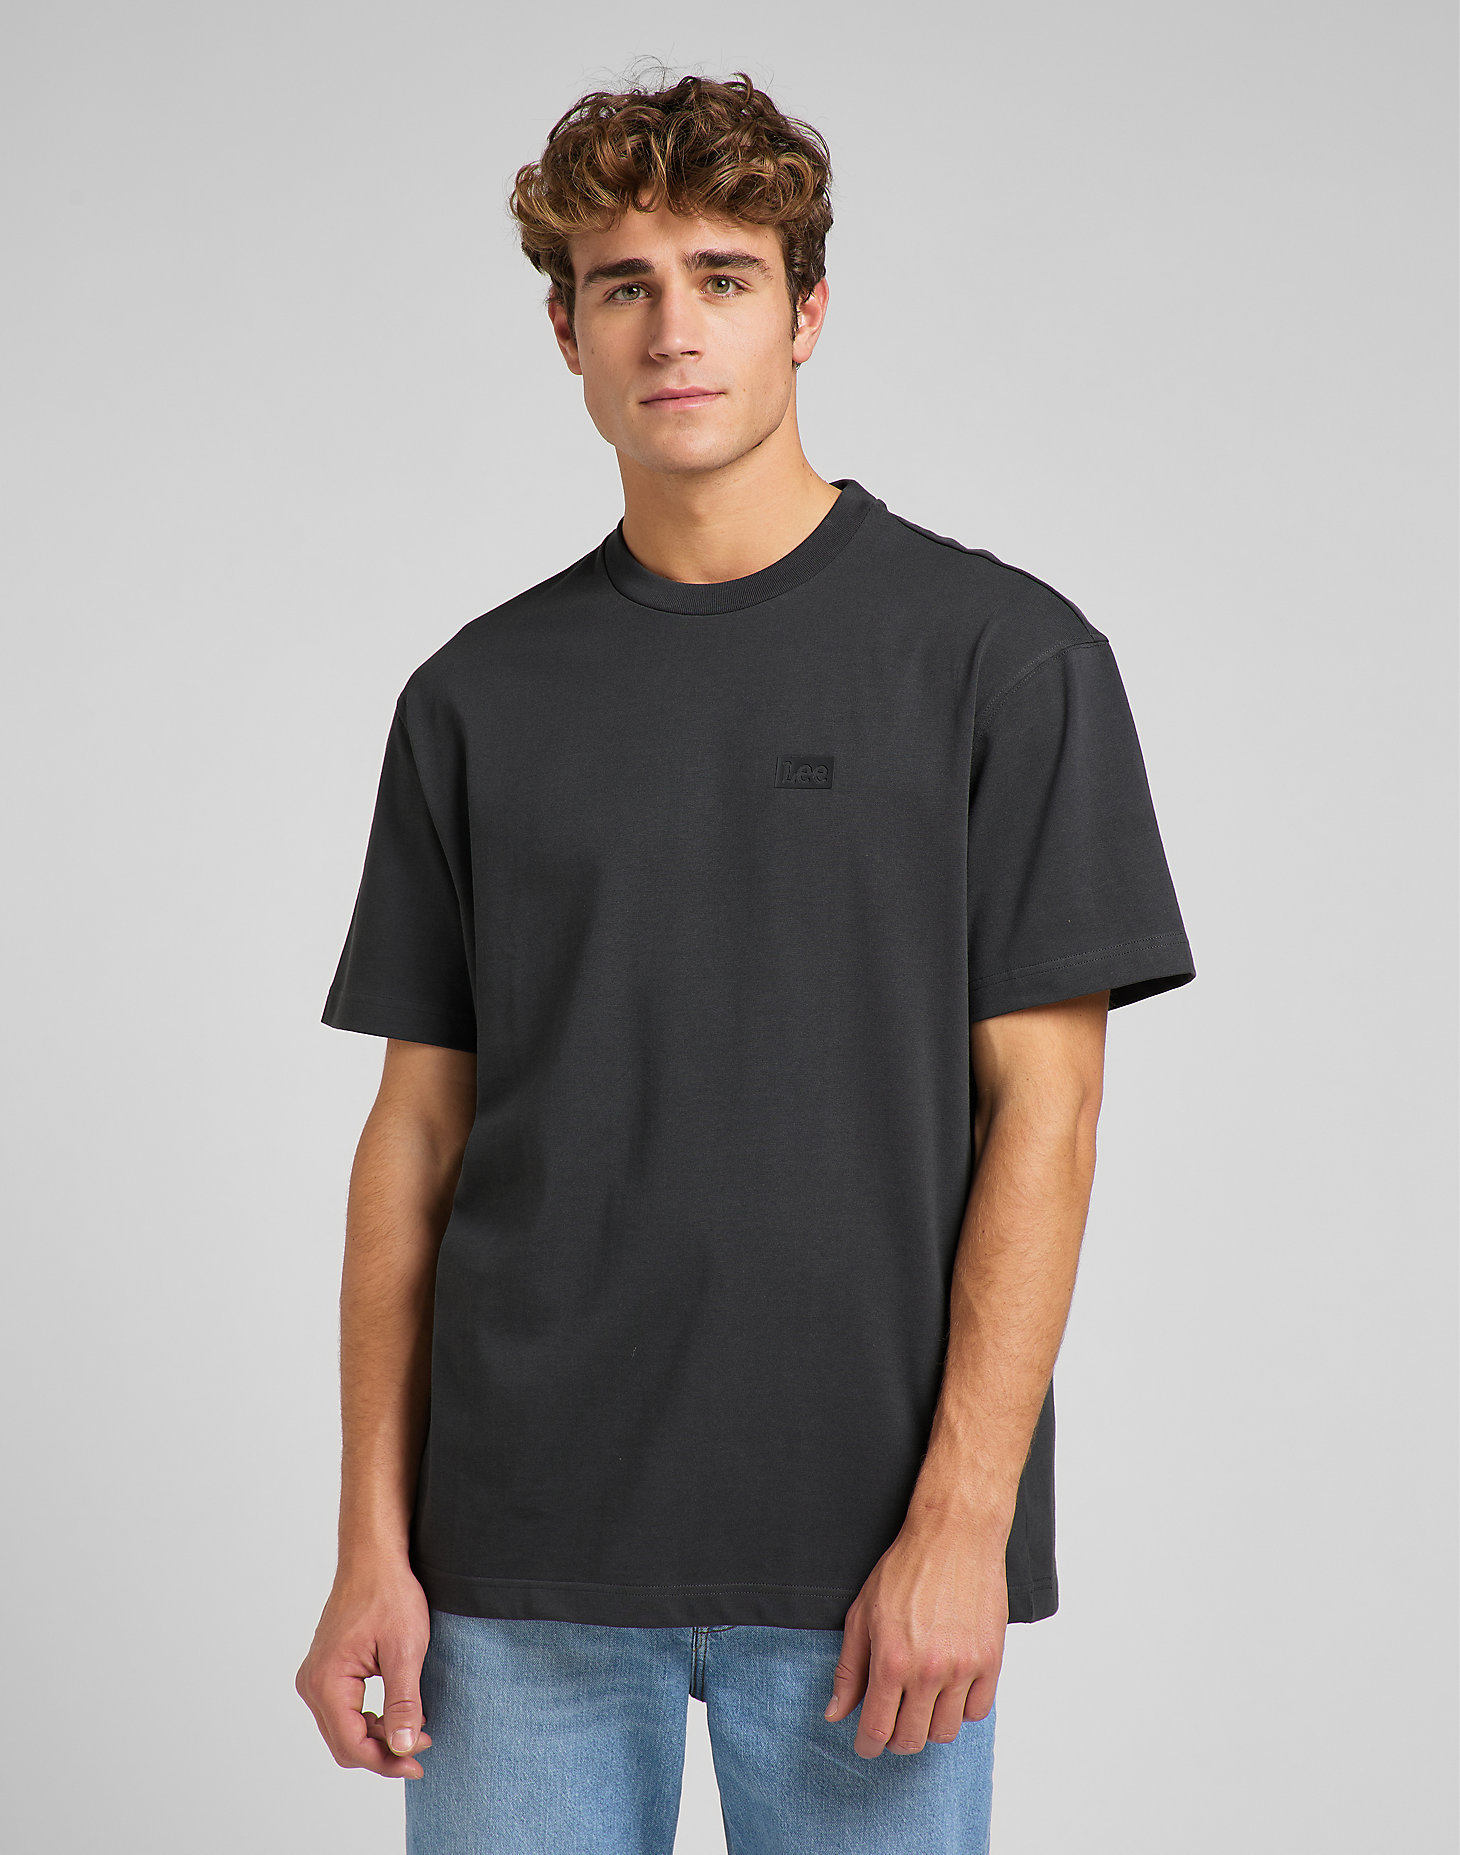 Core Loose Tee in Washed Black alternative view 2